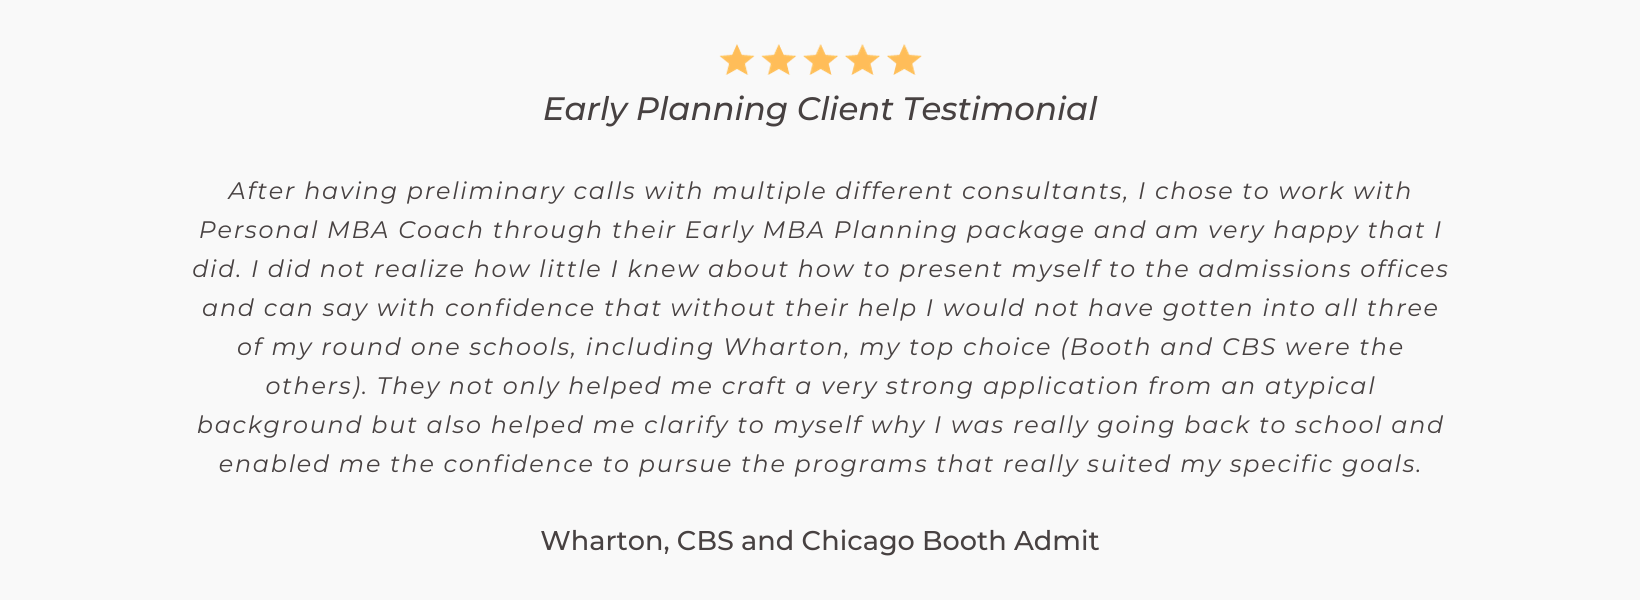 Client testimonial - Wharton, Columbia Business School and Chicago Booth admit